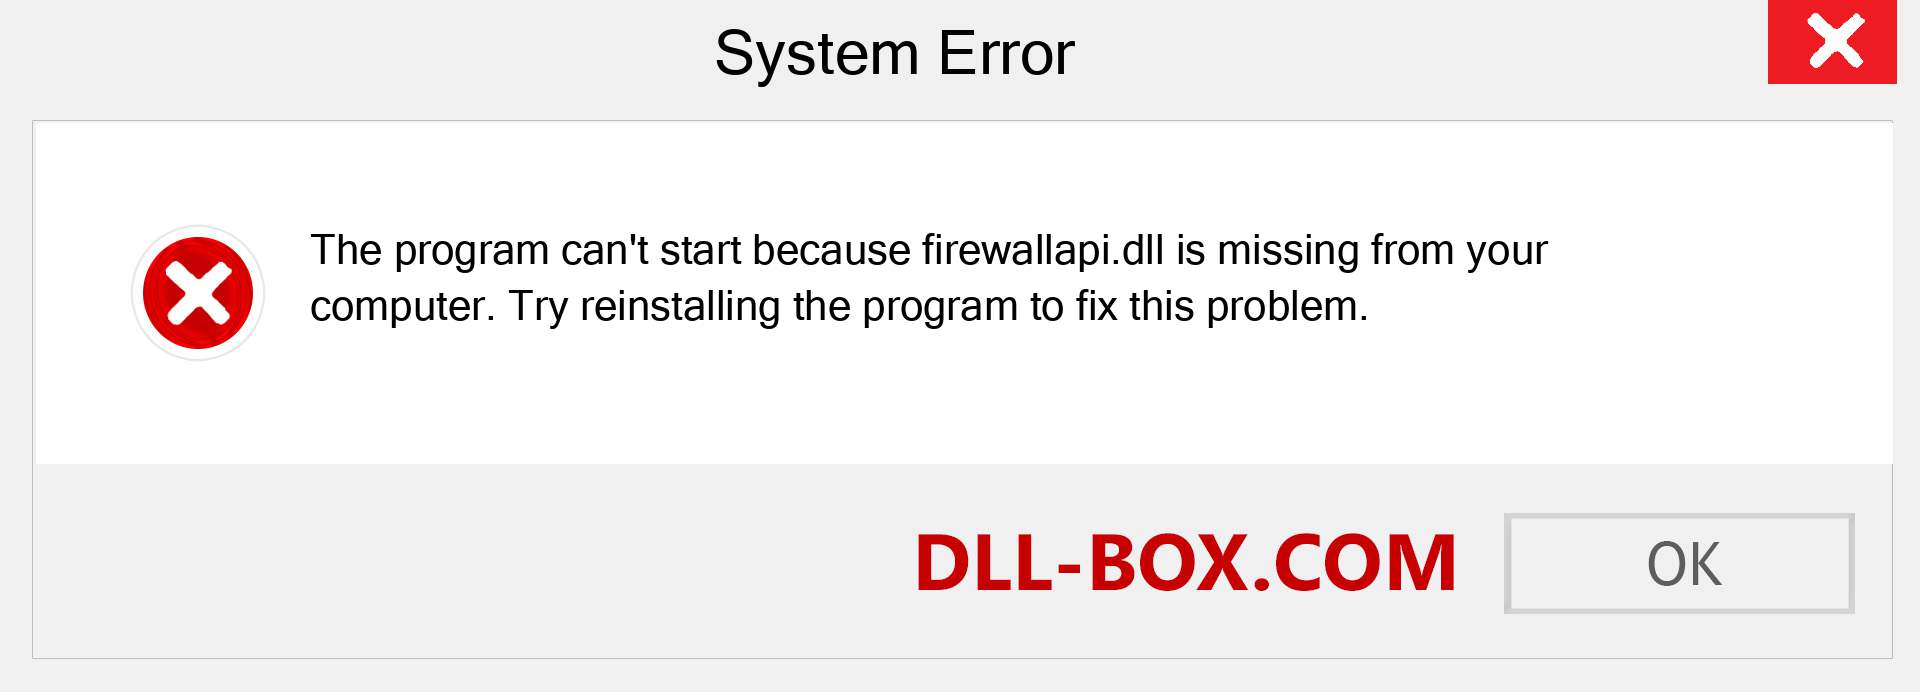  firewallapi.dll file is missing?. Download for Windows 7, 8, 10 - Fix  firewallapi dll Missing Error on Windows, photos, images